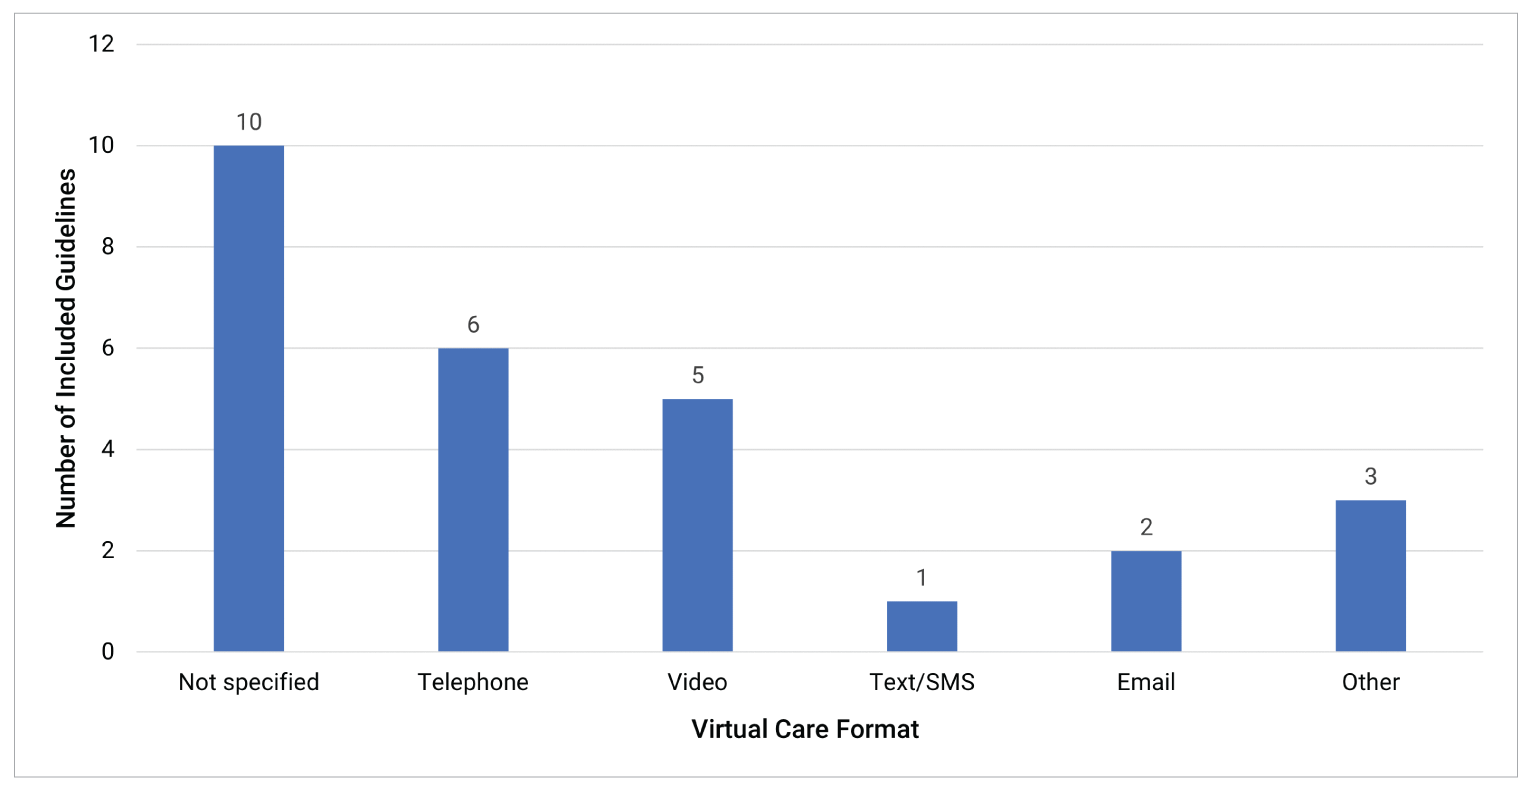 A bar graph showing the number of included guidelines that described virtual care format. Ten guidelines did not report virtual care format for at least 1 of the recommendations provided by the guideline. Six guidelines provided recommendations regarding telephone use, 5 guidelines provided recommendations regarding video use, 1 guideline provided recommendations regarding text or short message service use, 2 guidelines provided recommendations regarding email use, and 3 guidelines provided recommendations regarding another virtual care format.